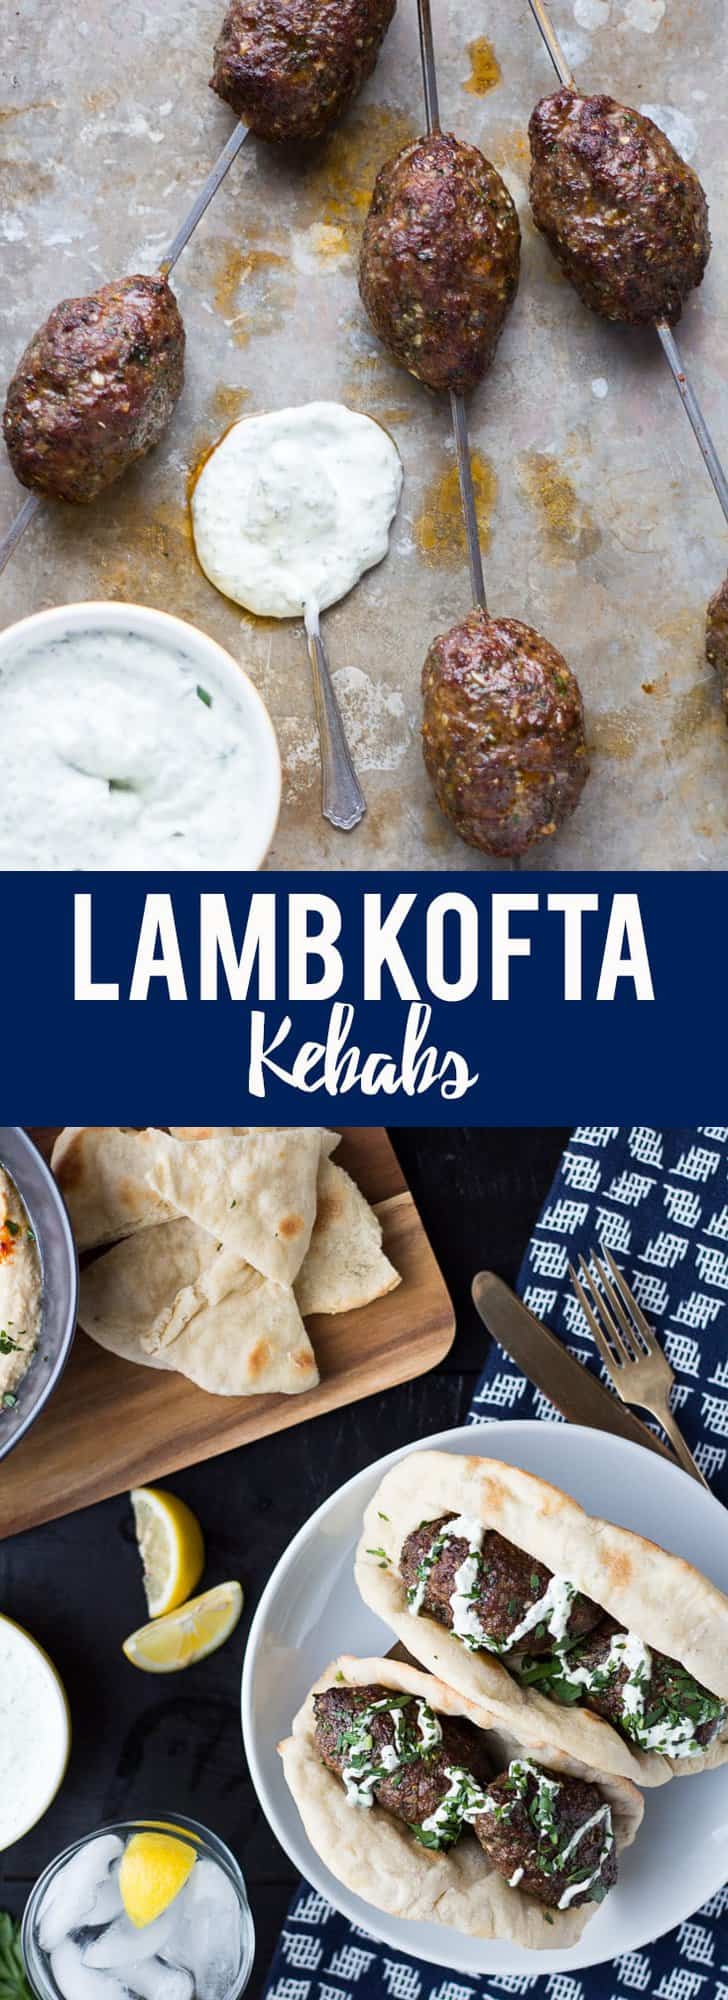 These Grilled Lamb Kofta Kebabs are spiced middle eastern meatballs that you can grill or bake in the oven!